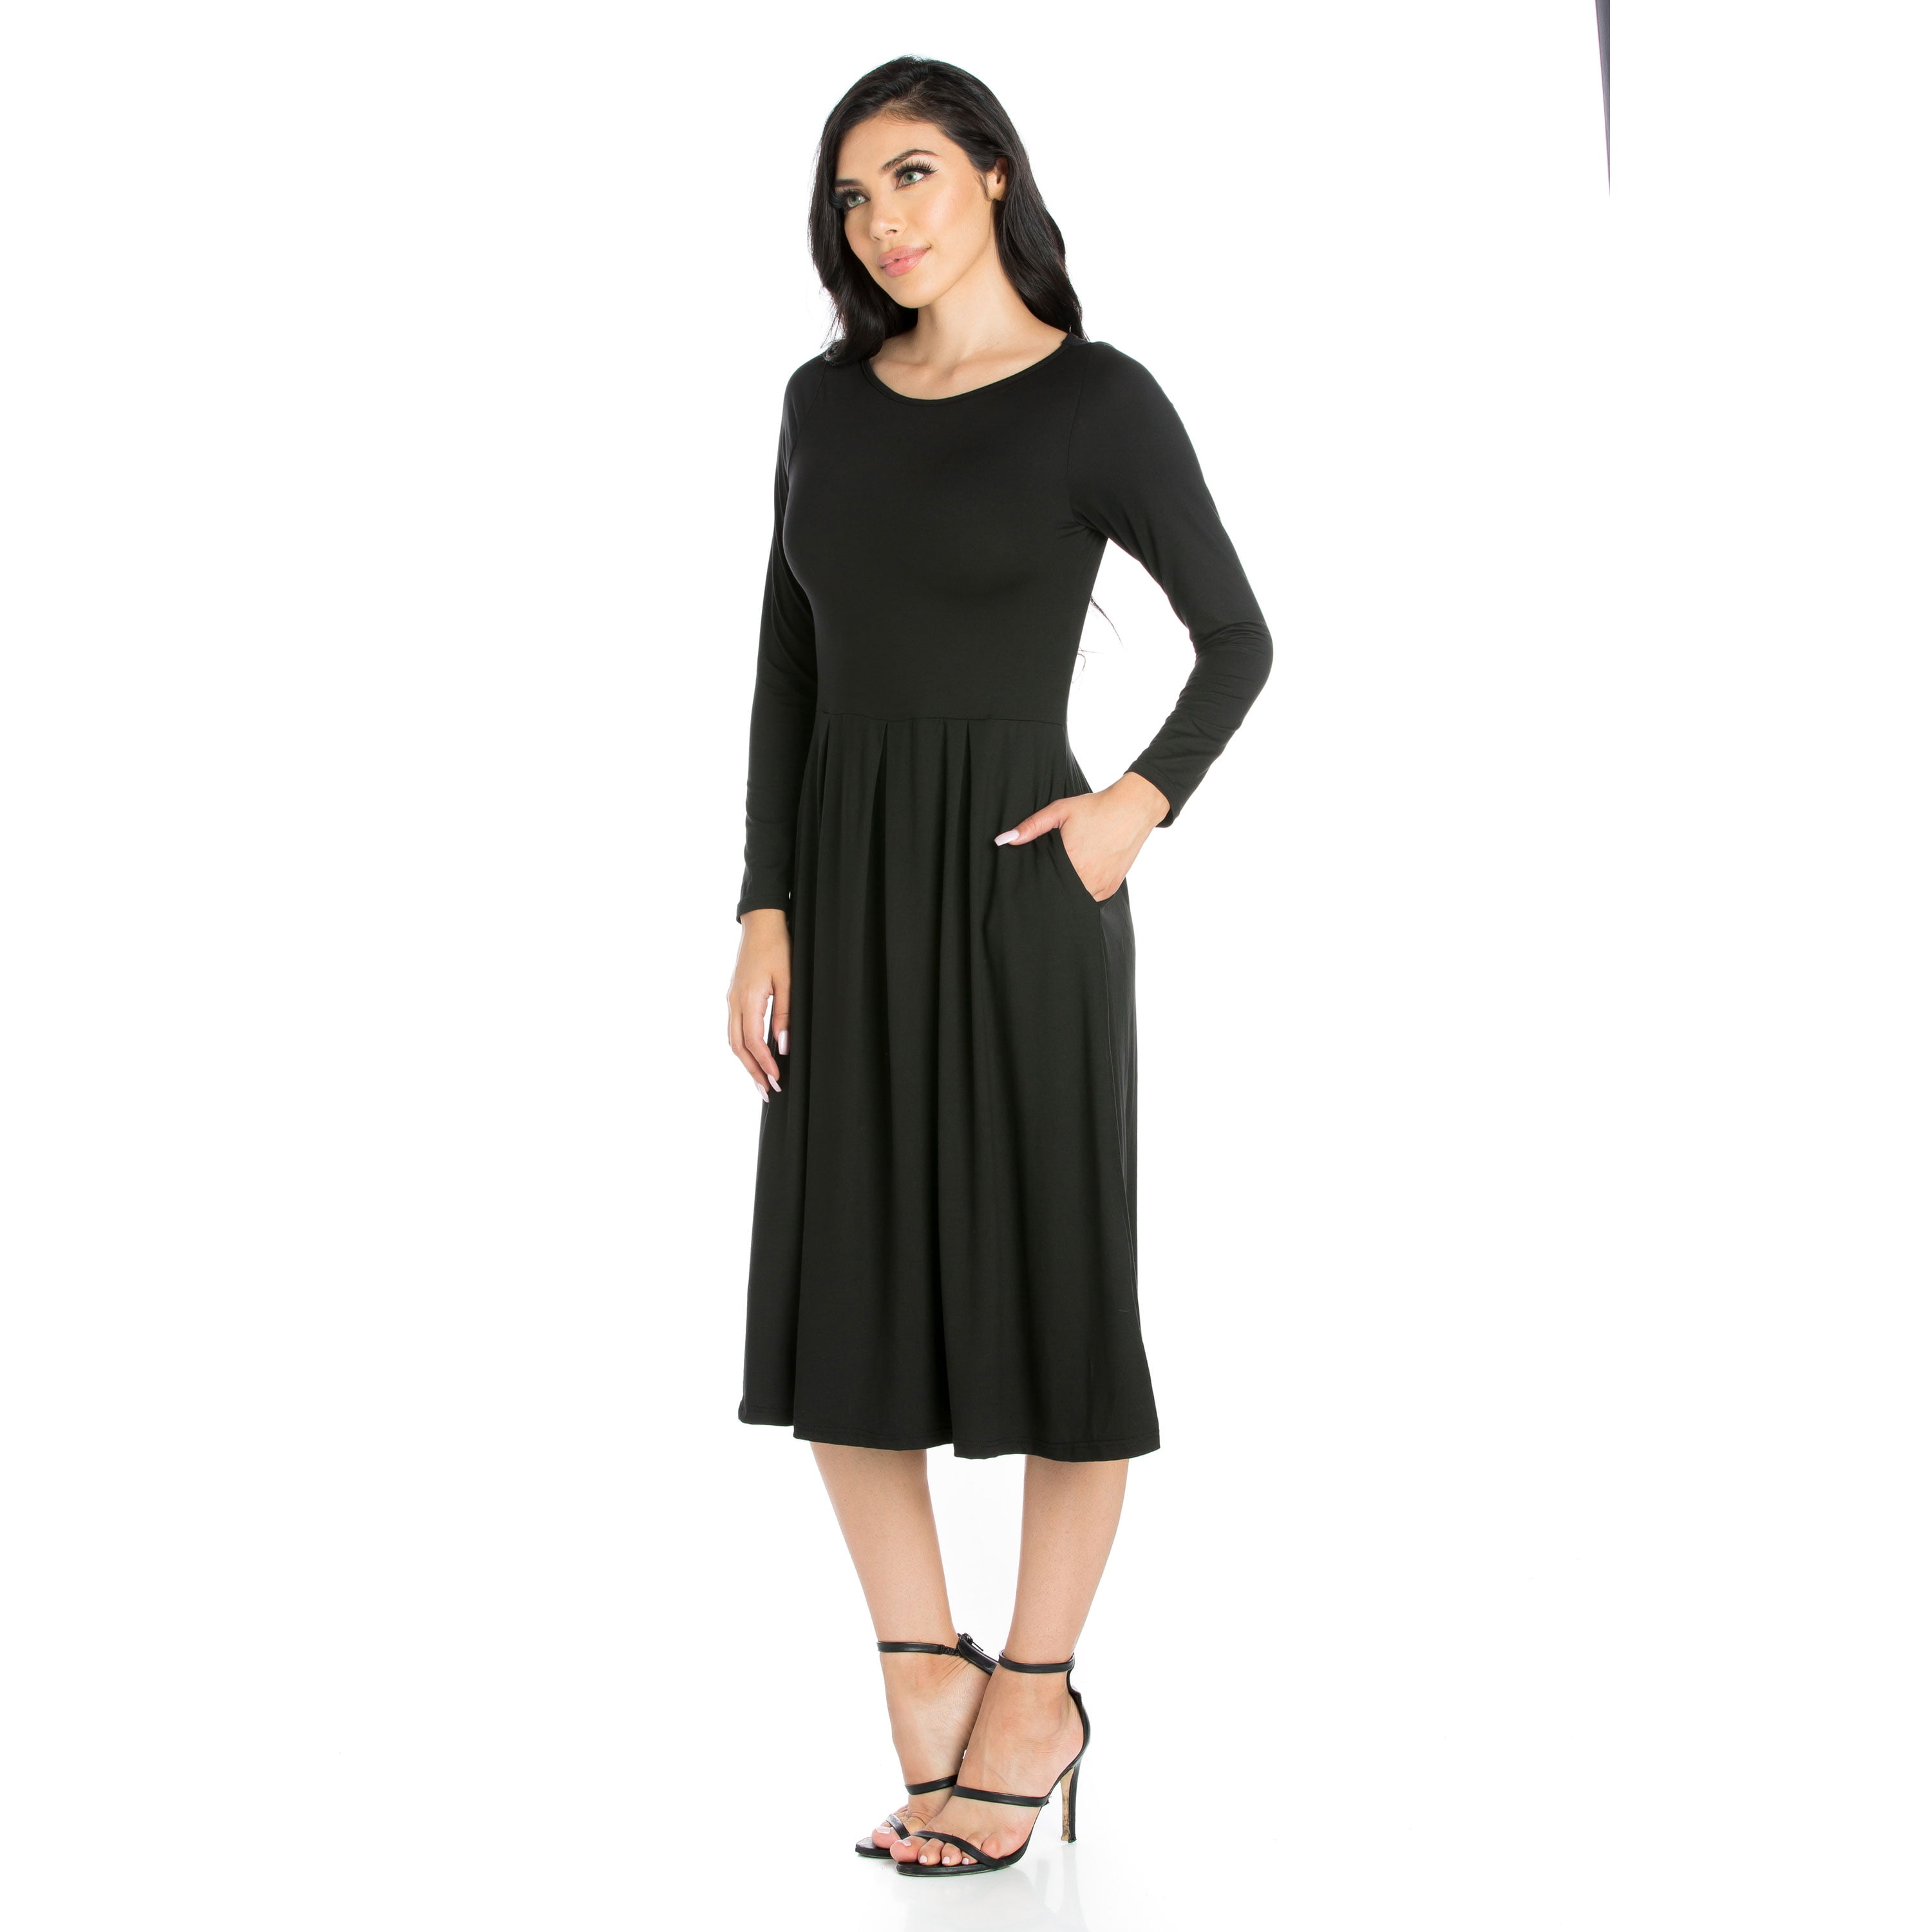 24/7 Comfort Apparel Women's Long Sleeve Fit and Flare Midi Dress 